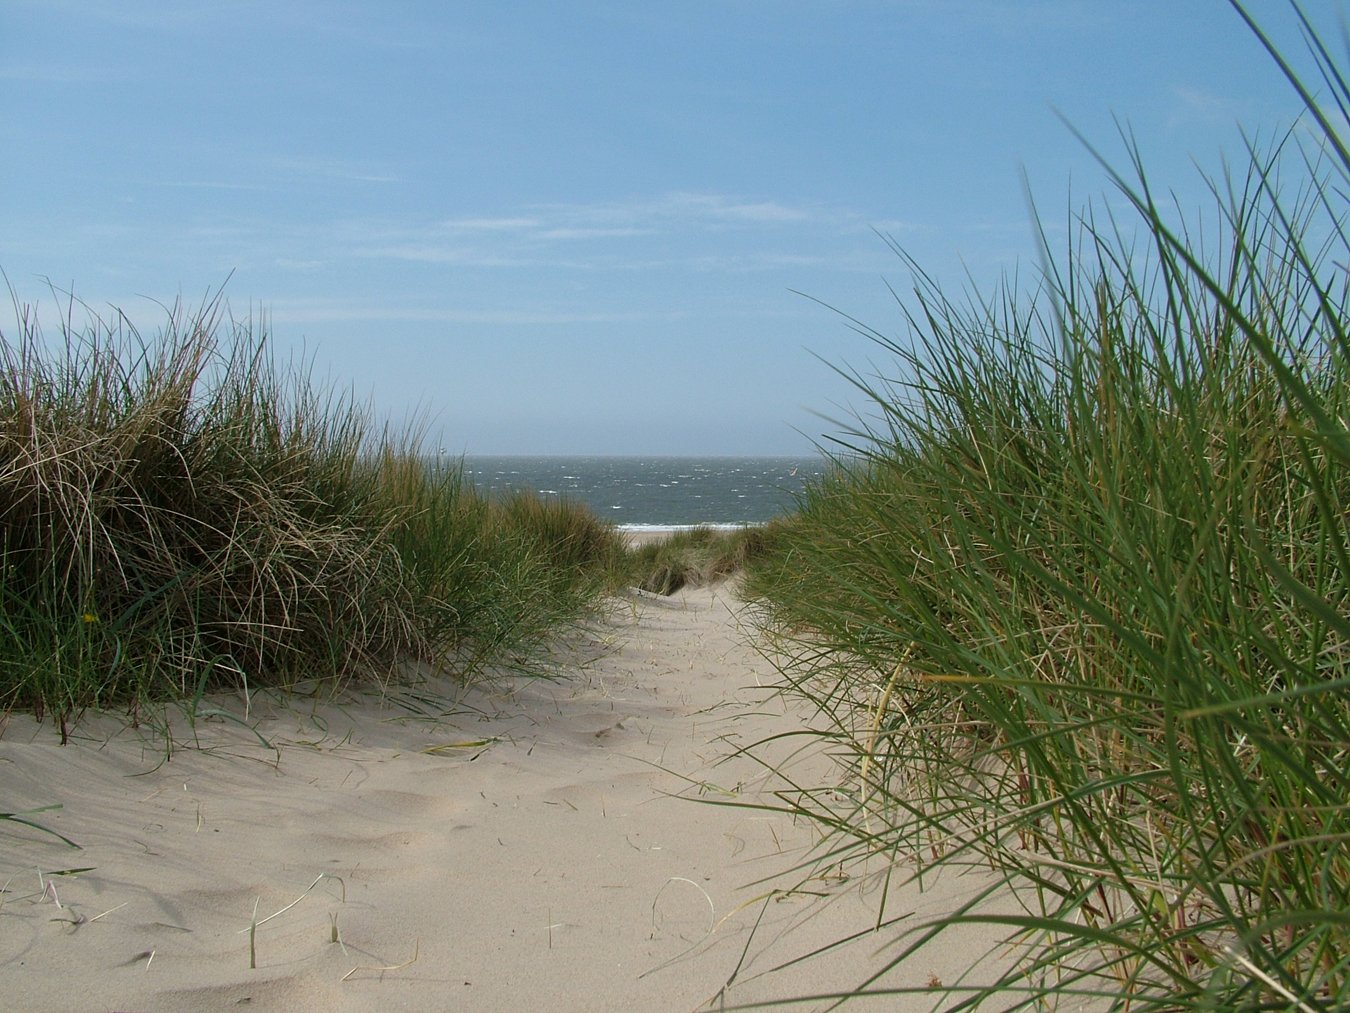 a view of a beach from the sand with grass